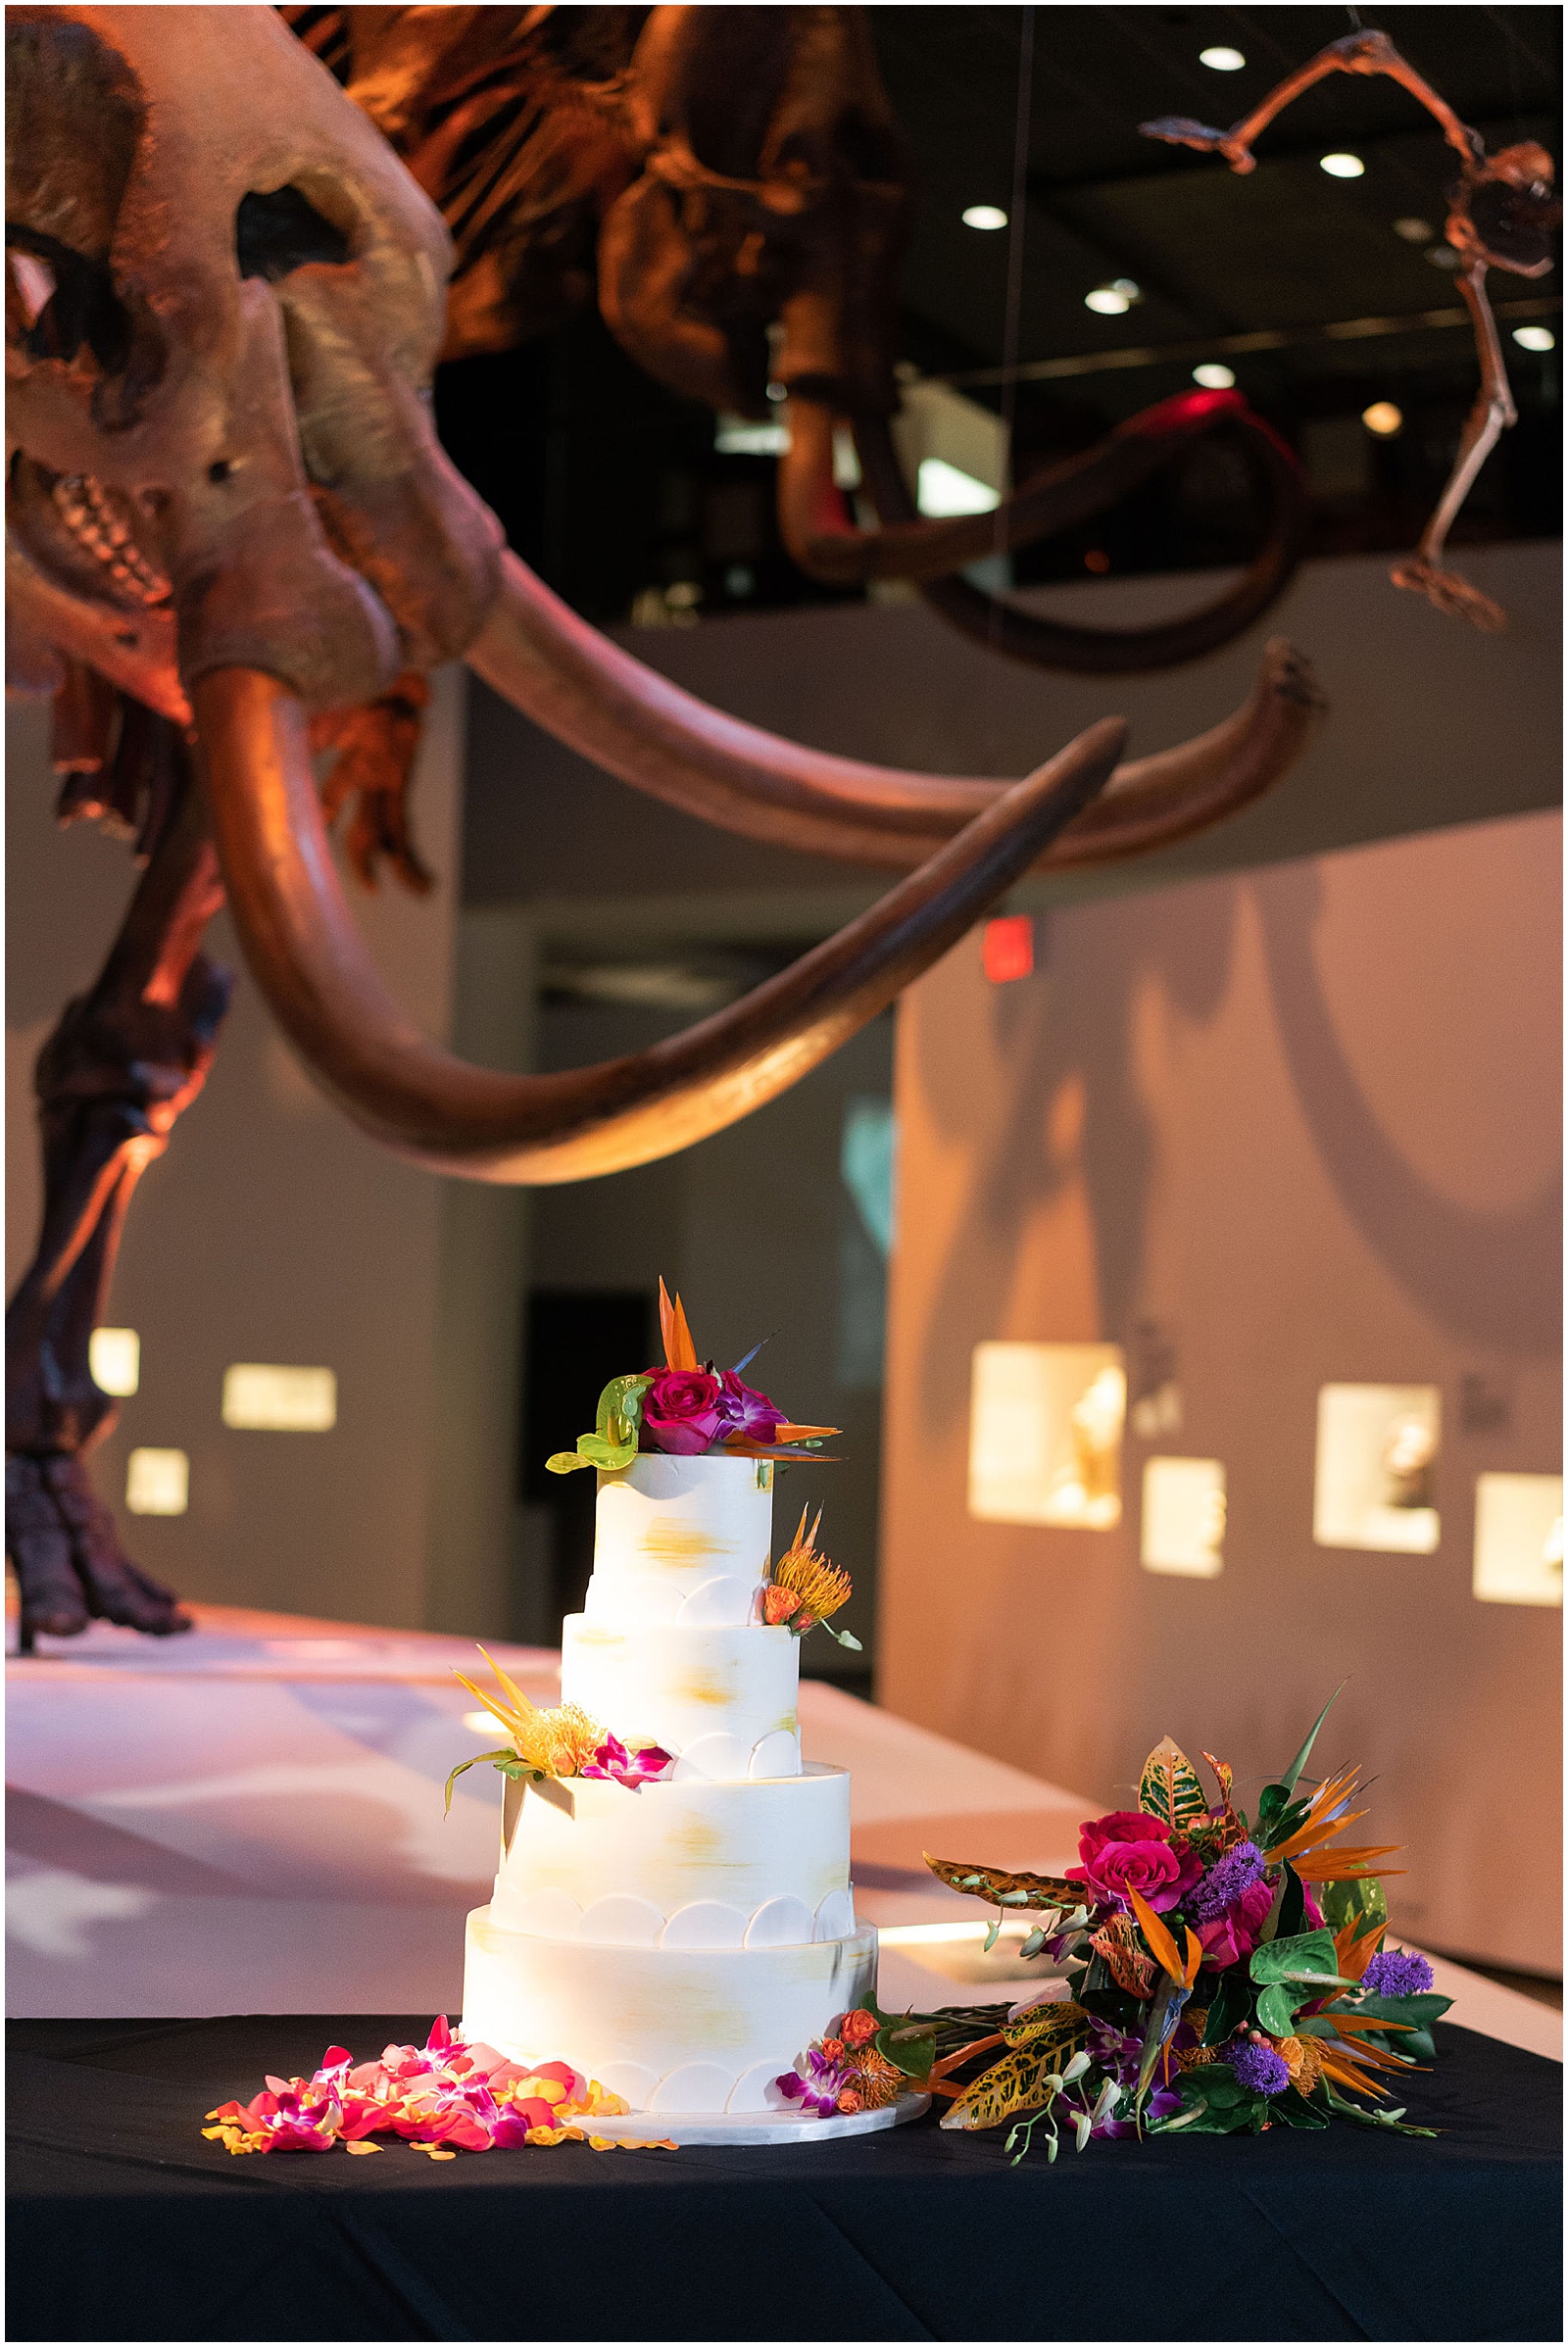 Wedding cake at the Houston Museum of Natural Science - Geologist Wedding Details | Swish and Click Photography